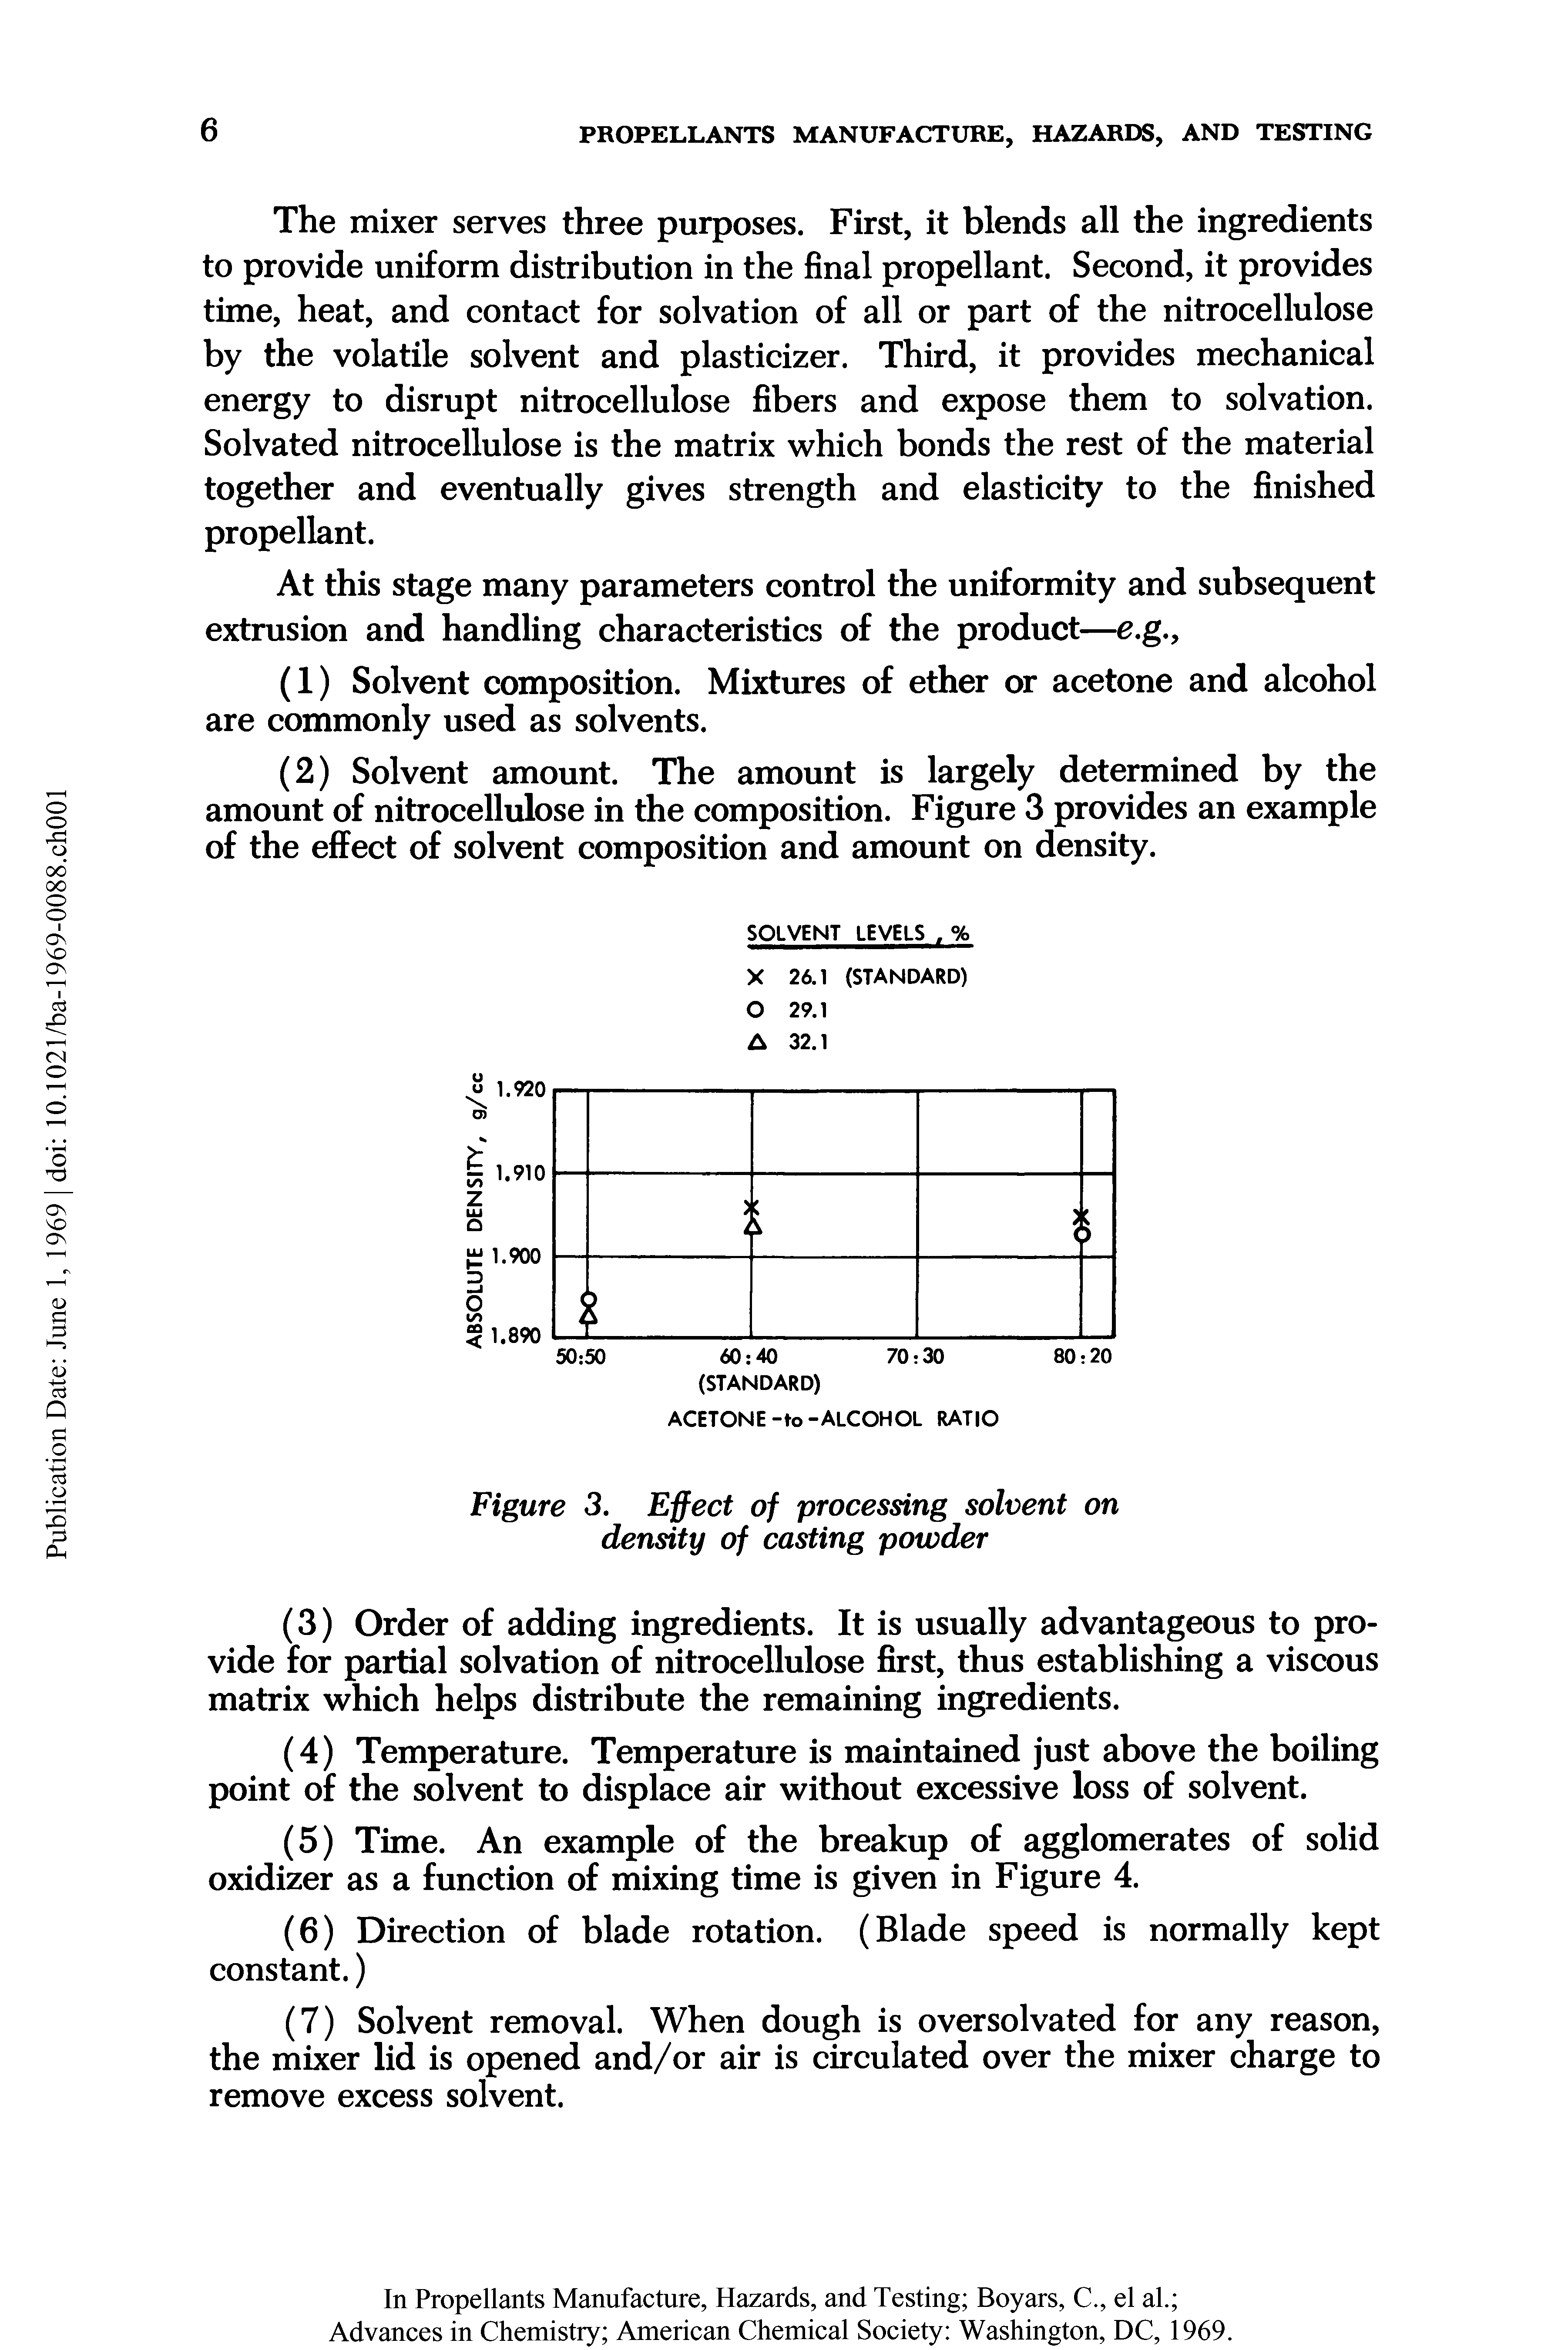 Figure 3. Effect of processing solvent on density of casting powder...